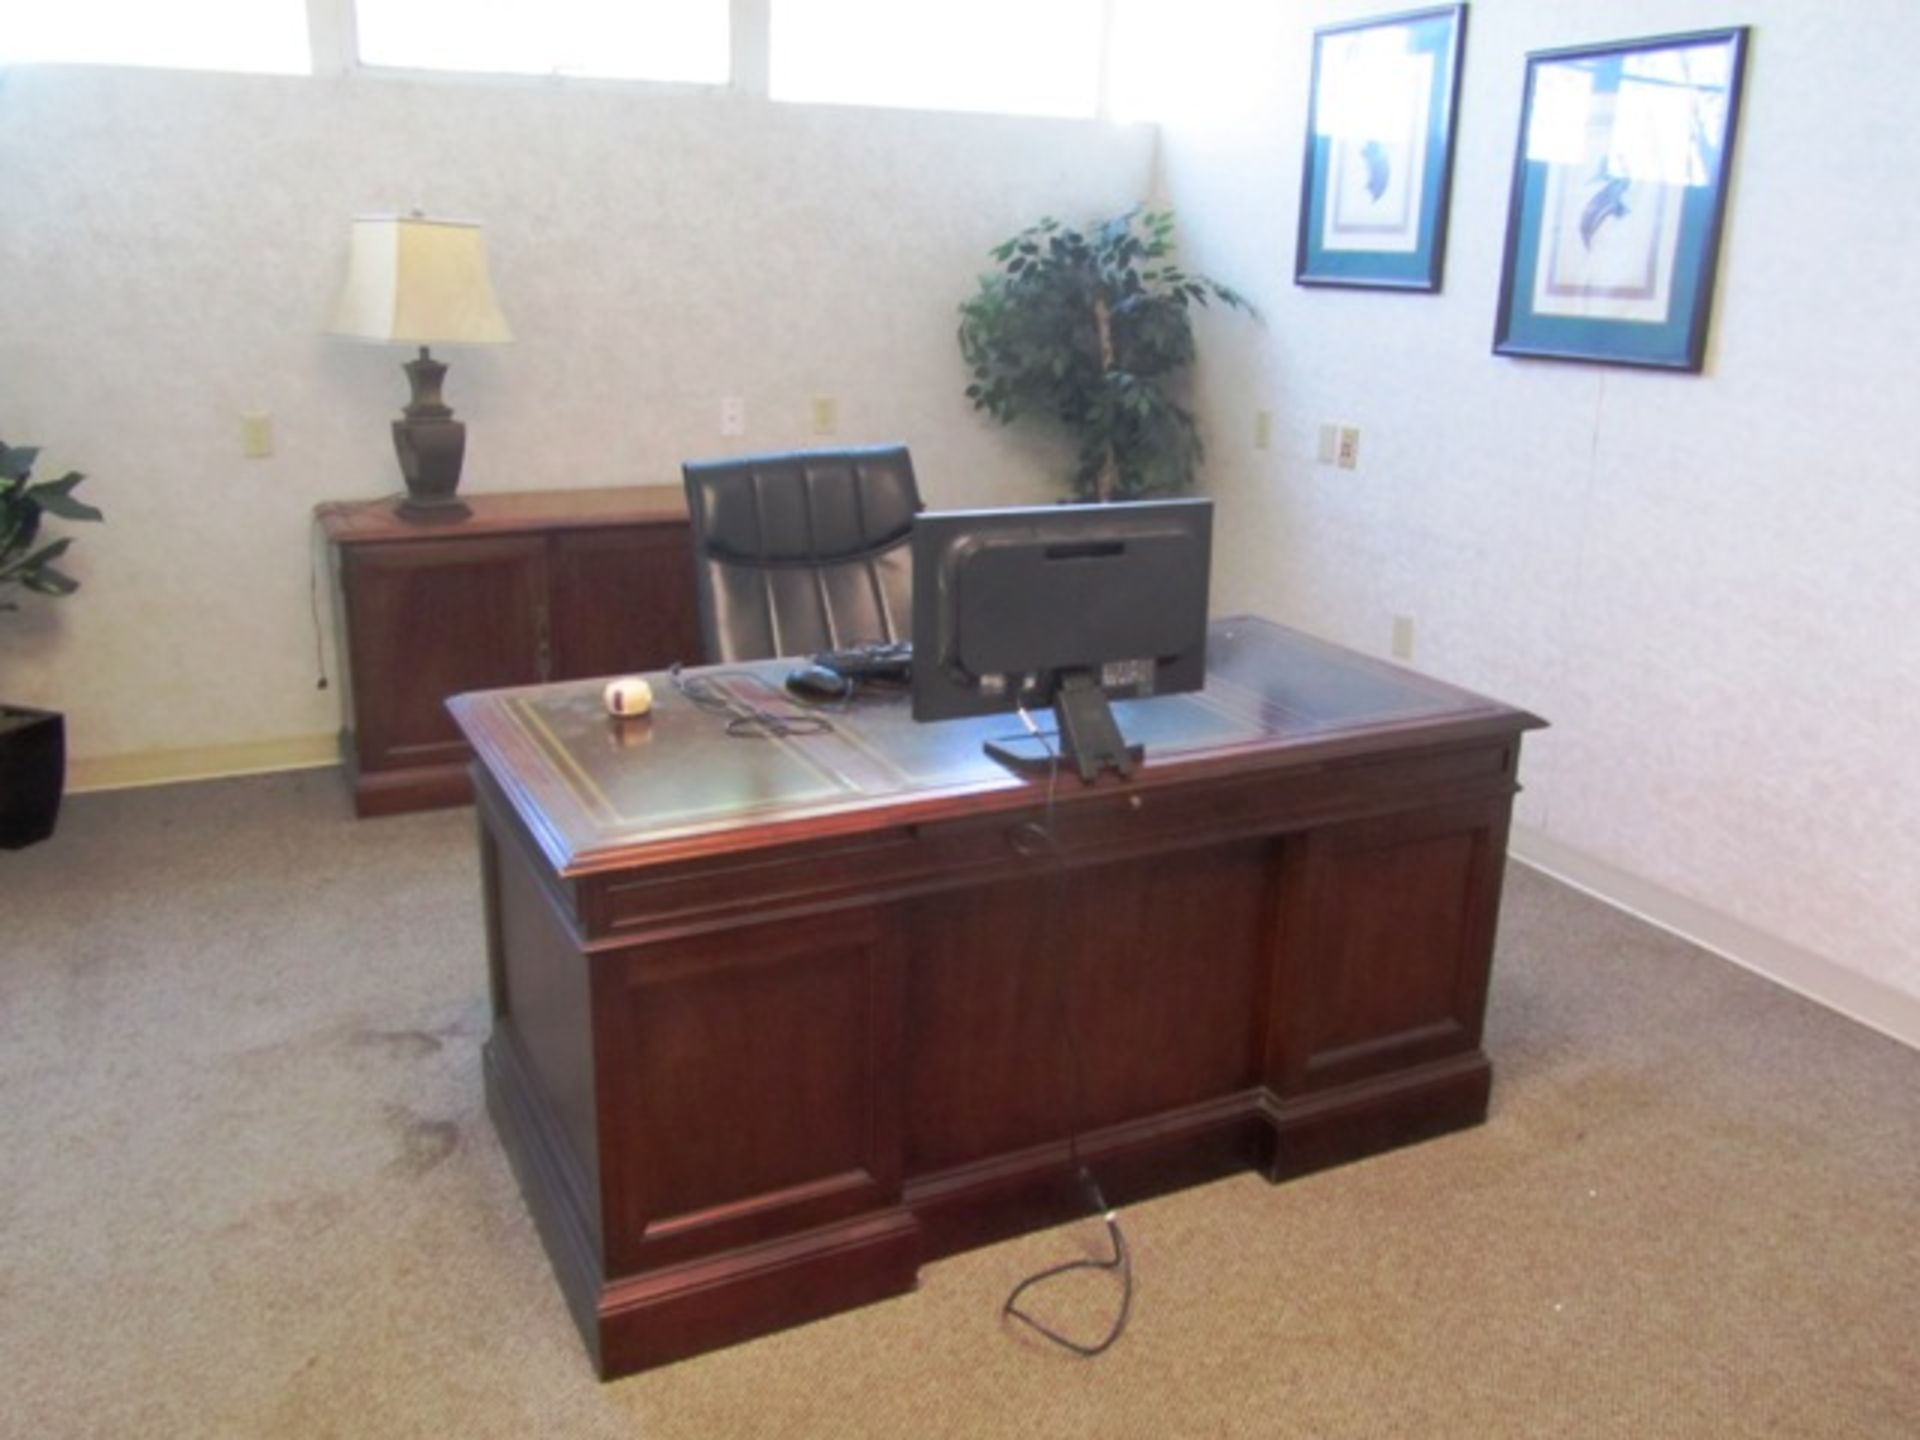 Contents of Office consisting of Desk, Chair, Credenza